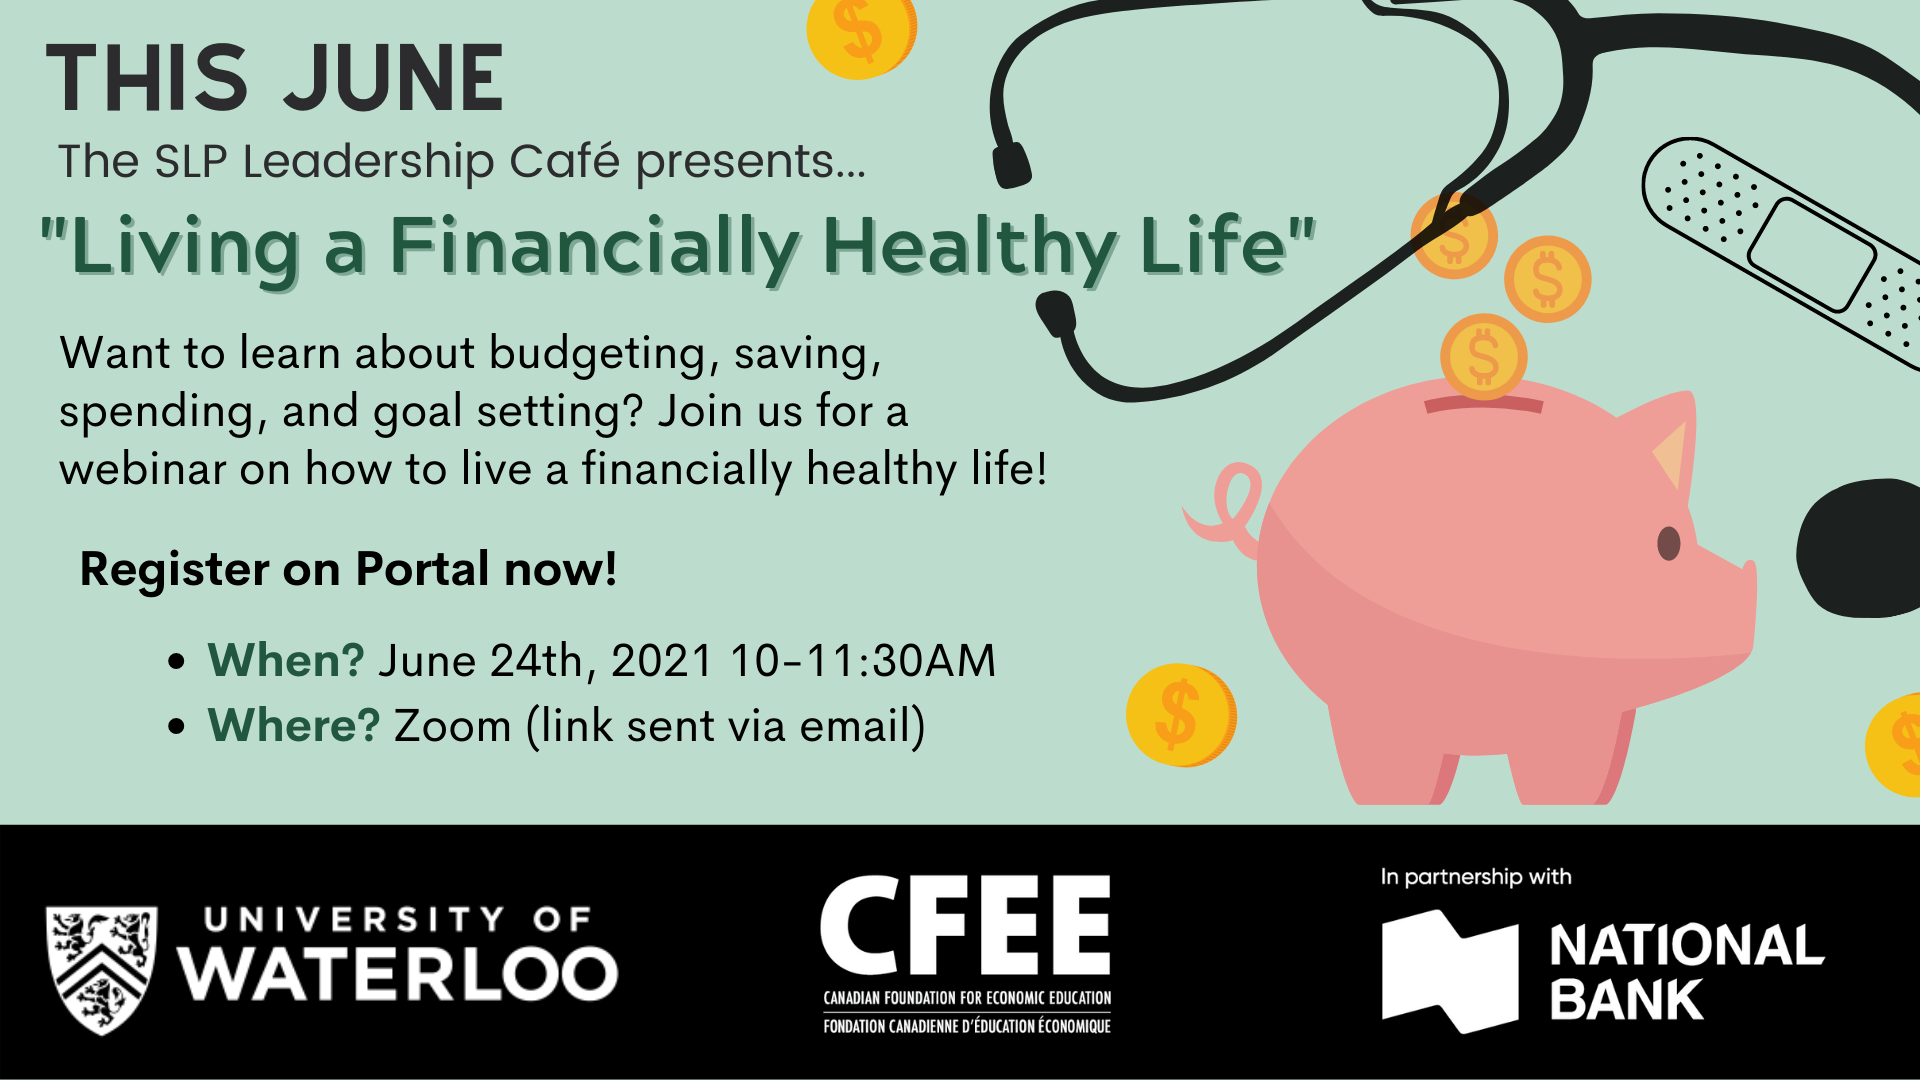 "This June the SLP Leadership Cafe presents Living a Financially Healthy Life."